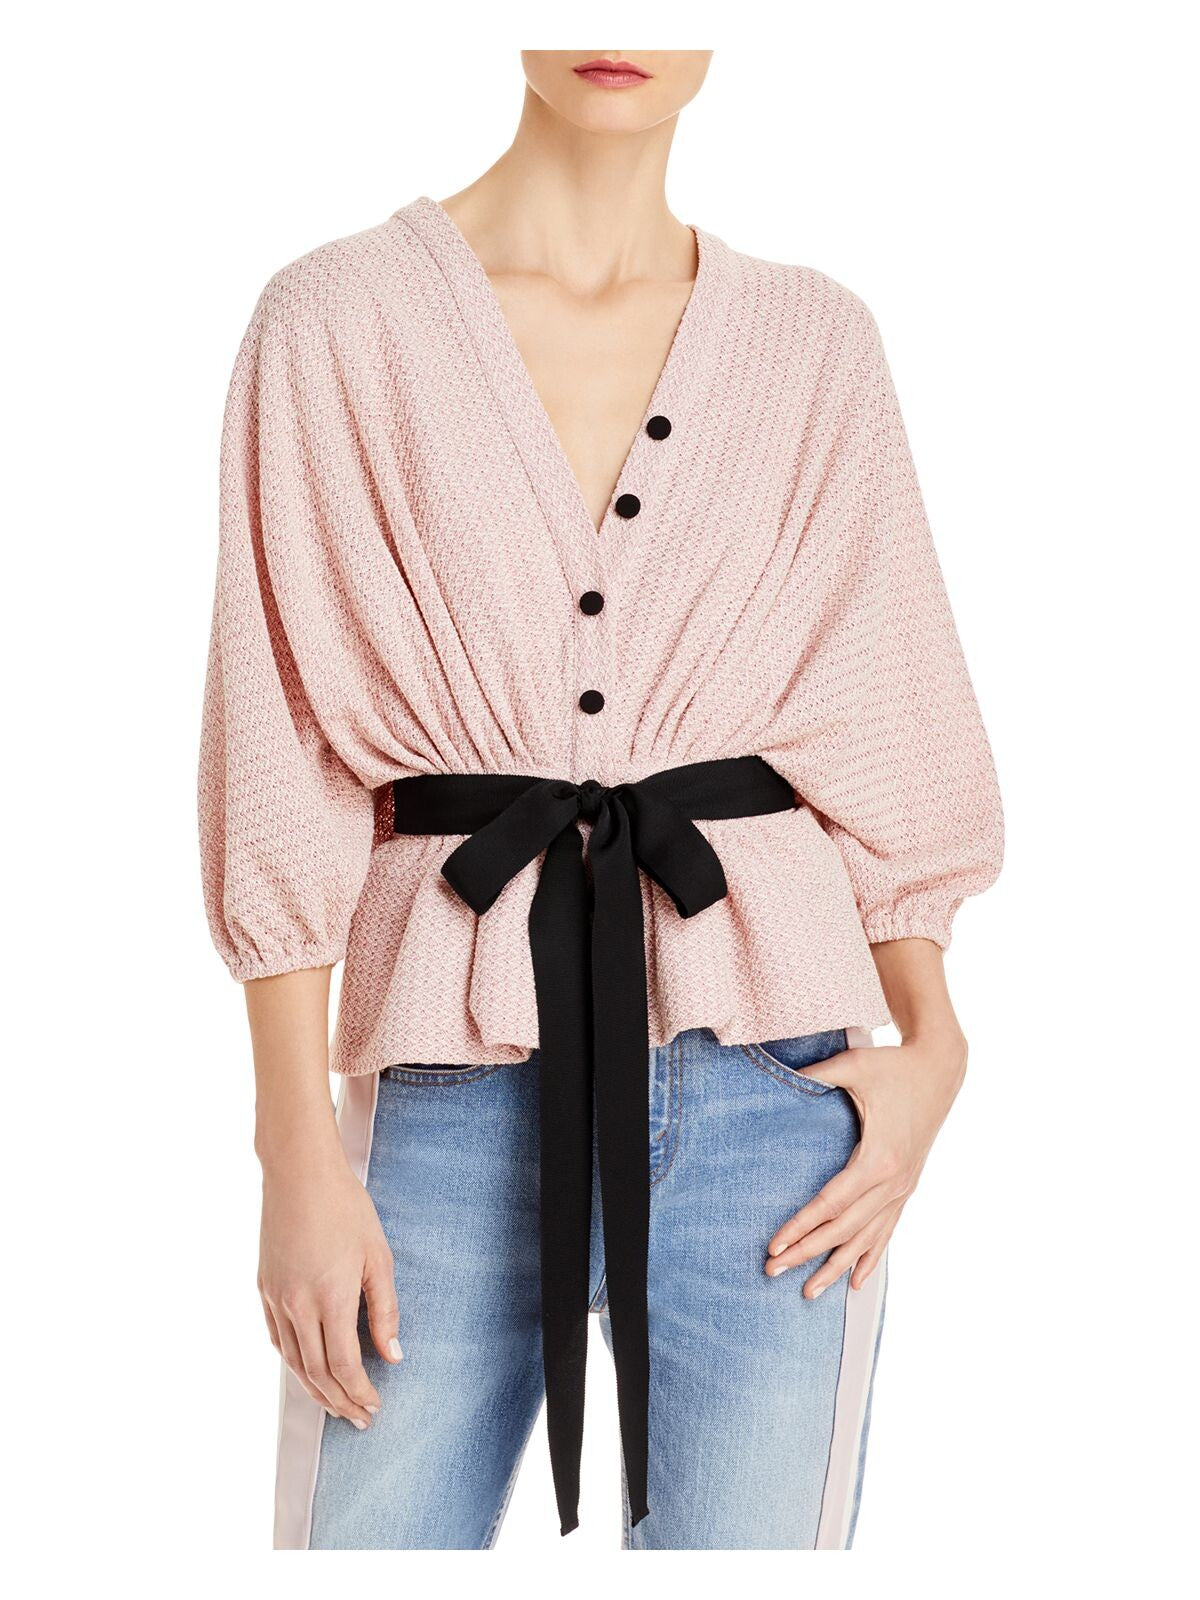 HELLESSY Womens Pink Pleated Textured Button Detail Tie Belt Unlined Dolman Sleeve V Neck Peplum Top XS